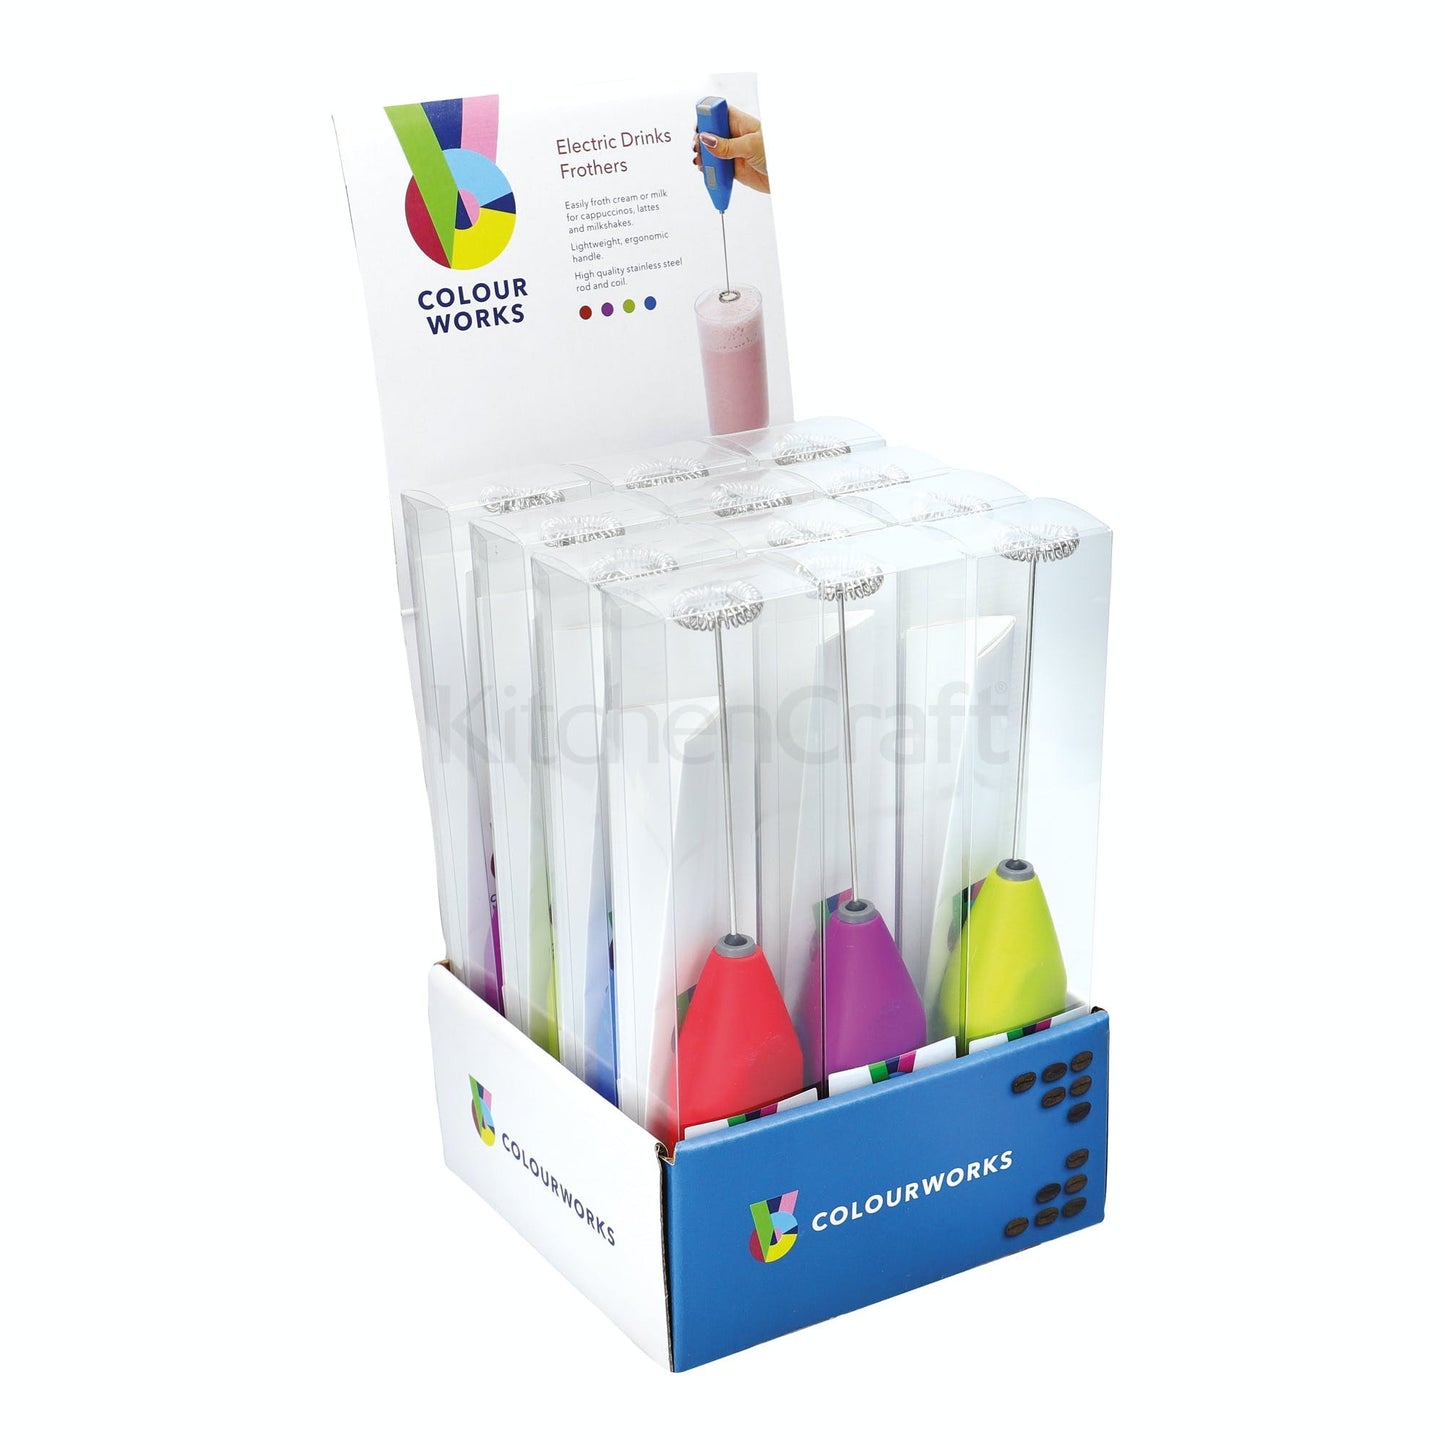 KitchenCraft Colourworks Display of 12 Electric Drink Frothers CWFROTHDISP12